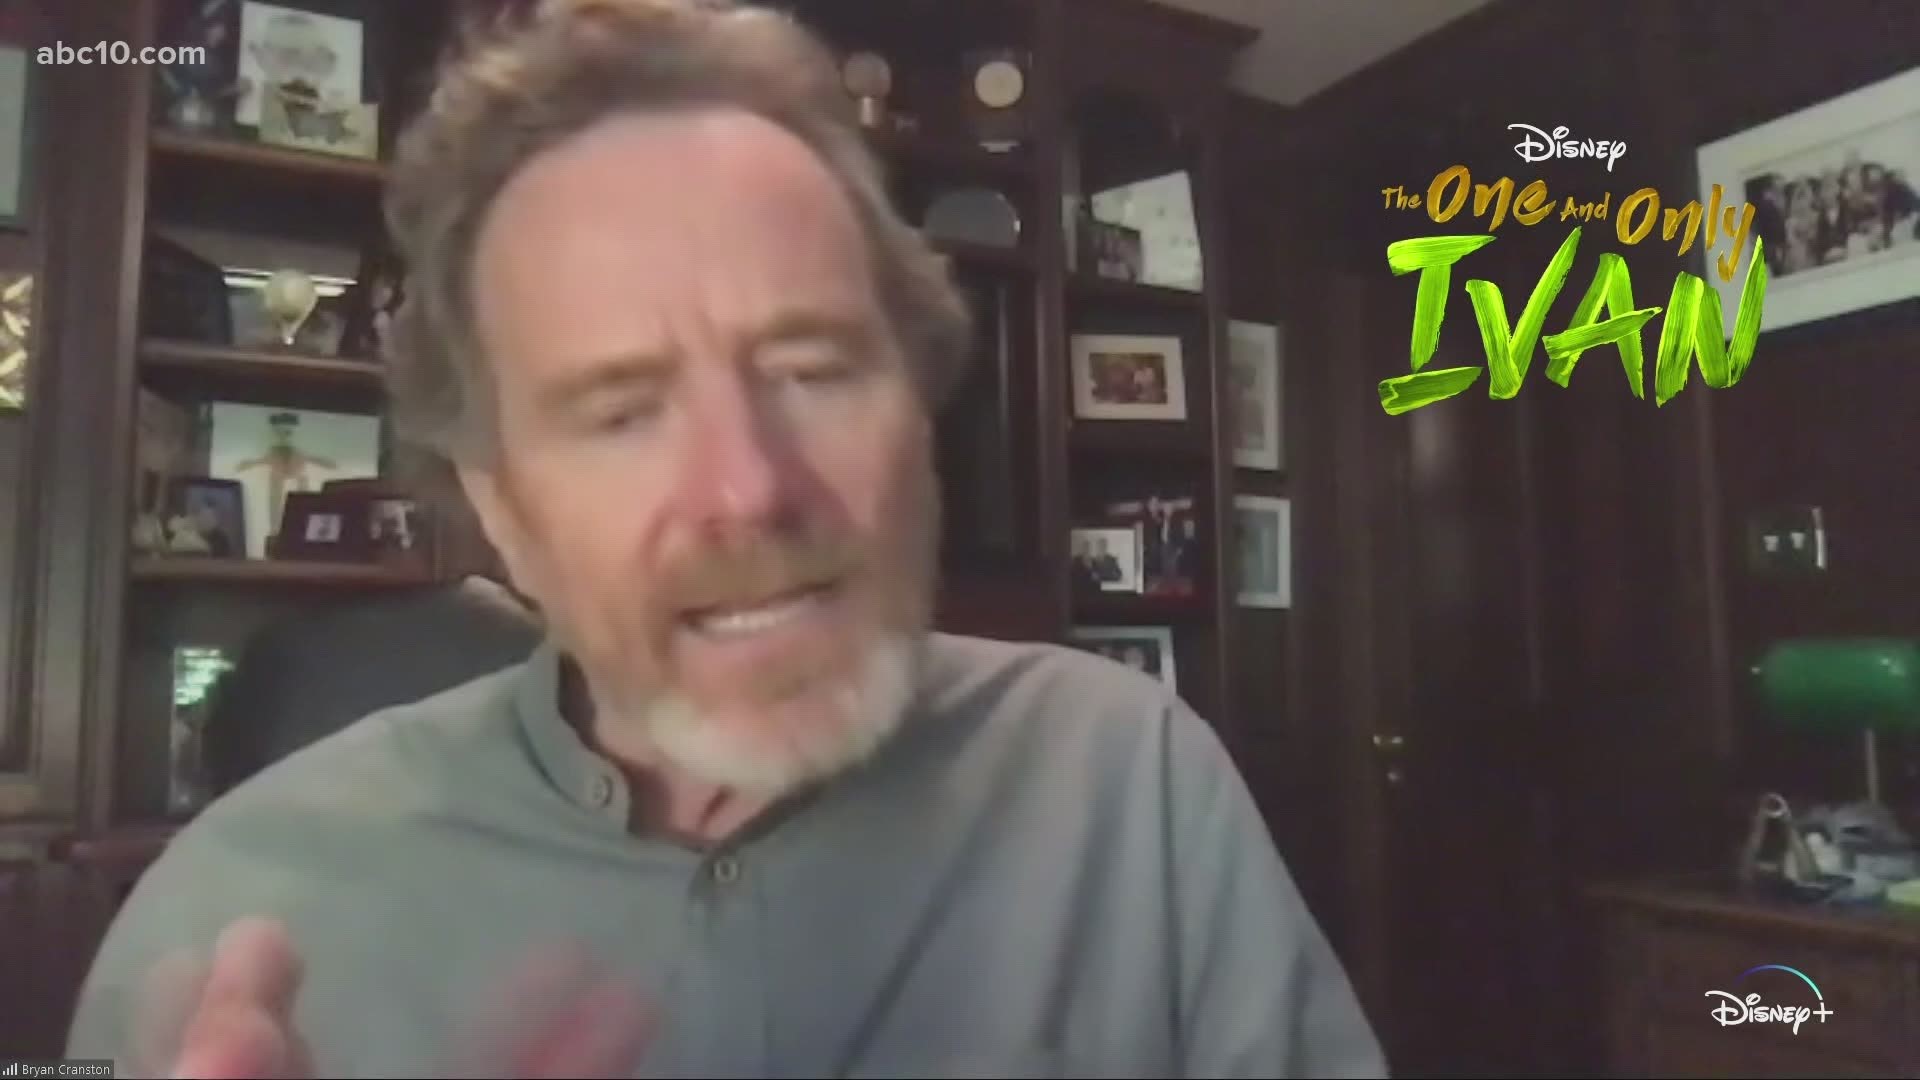 Bryan Cranston talks about new movie 'The One and Only Ivan' on Disney+